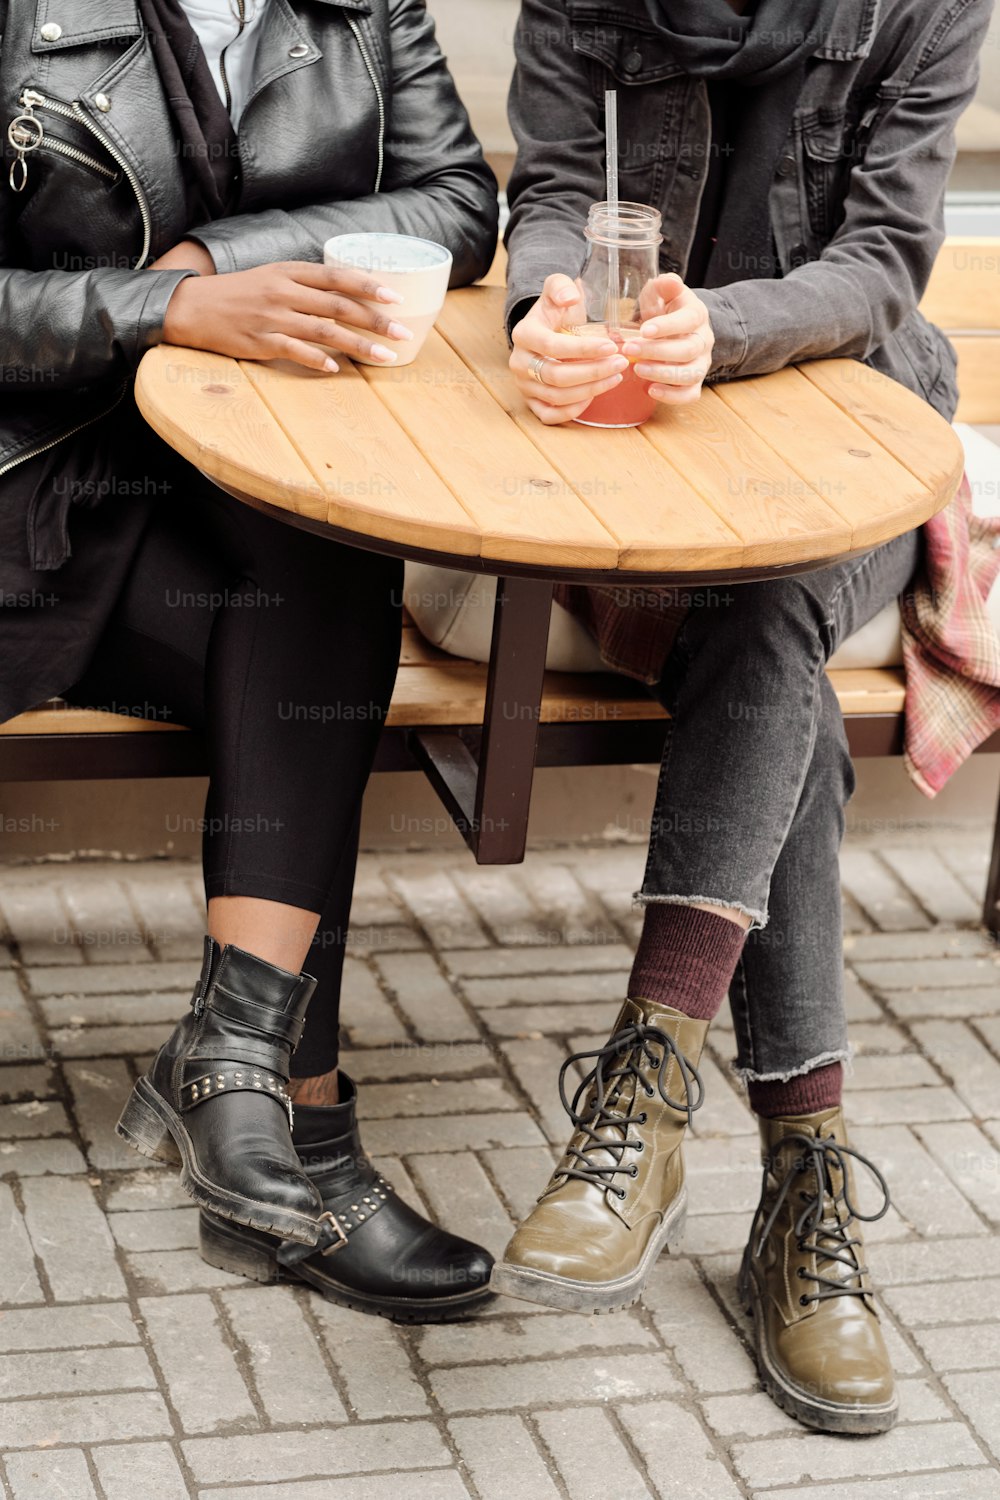 Two young intercultural females in casualwear having drinks by round wooden table outdoors